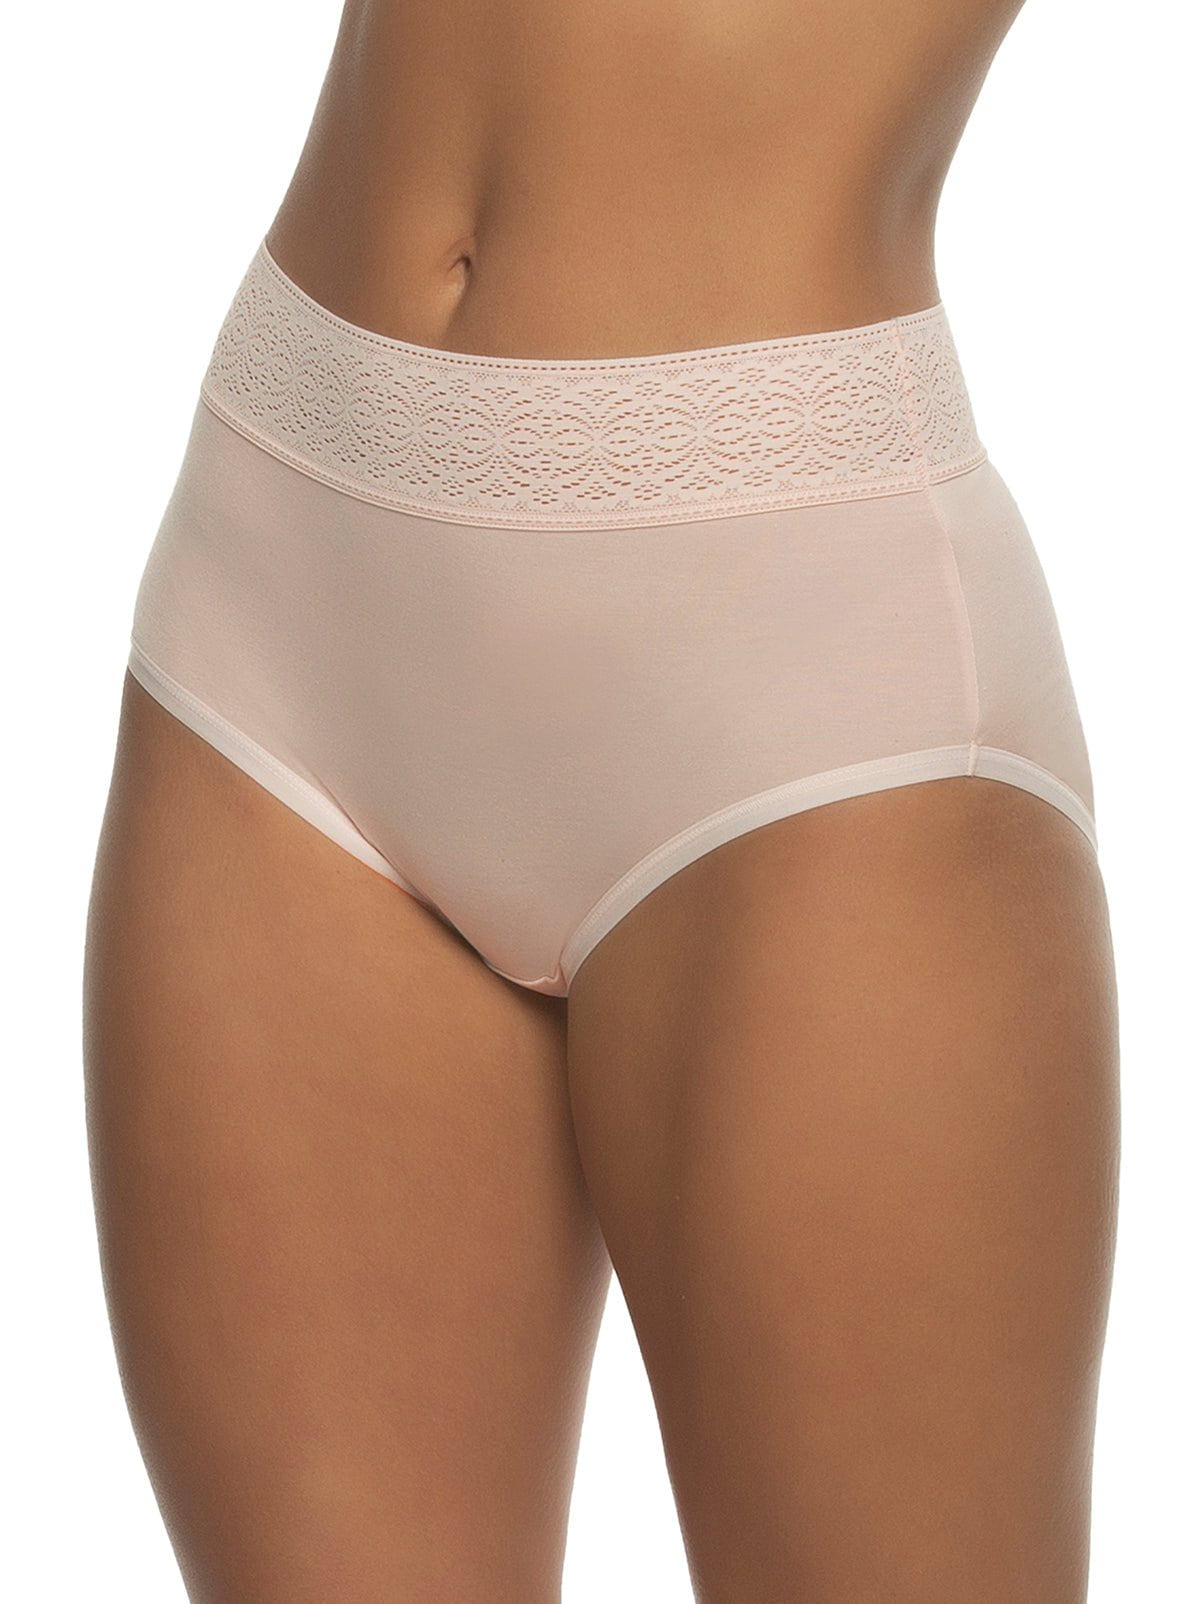 Pack of 10 Ladies Lace Brief Knickers Cotton Rich Underwear. Buy Now For  £14.00.